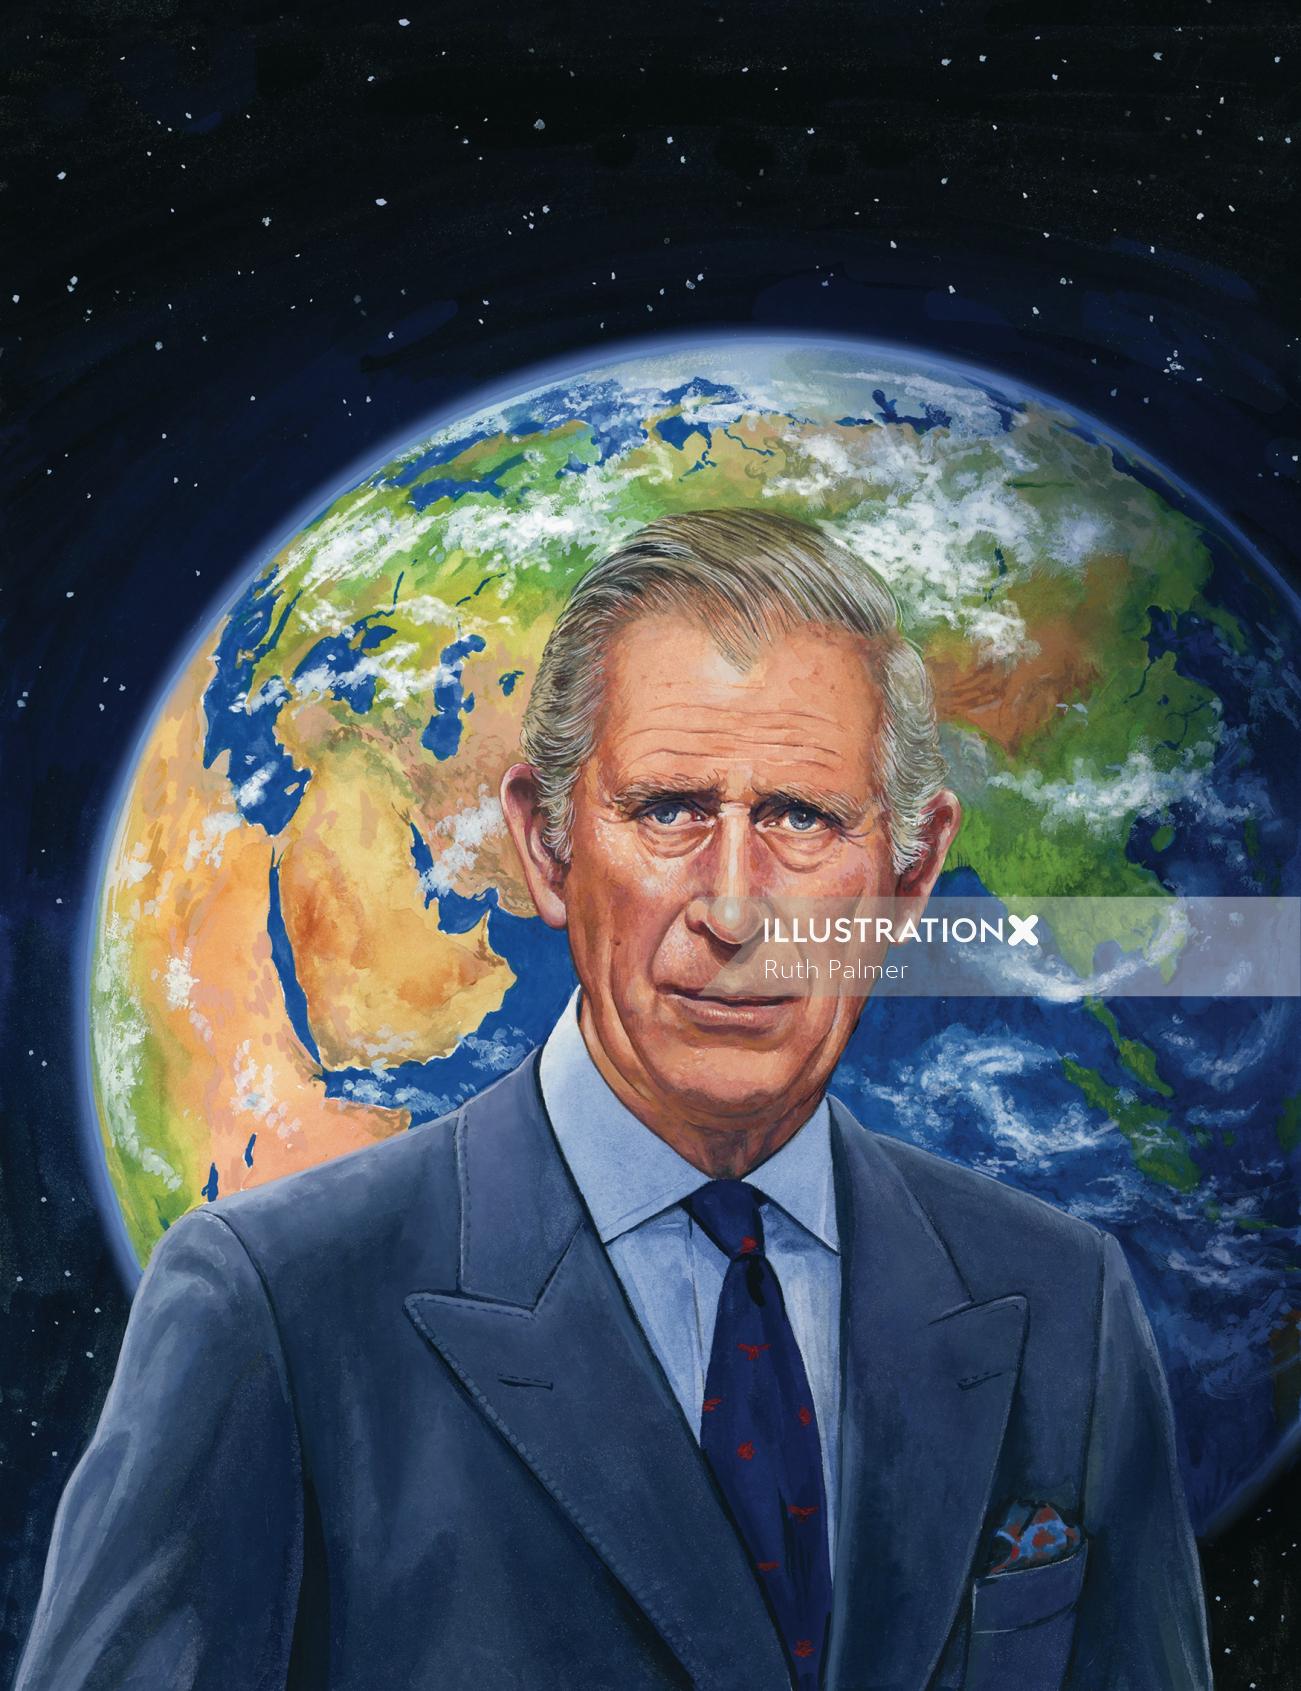 Prince charles portrait for telegraph magazine cover